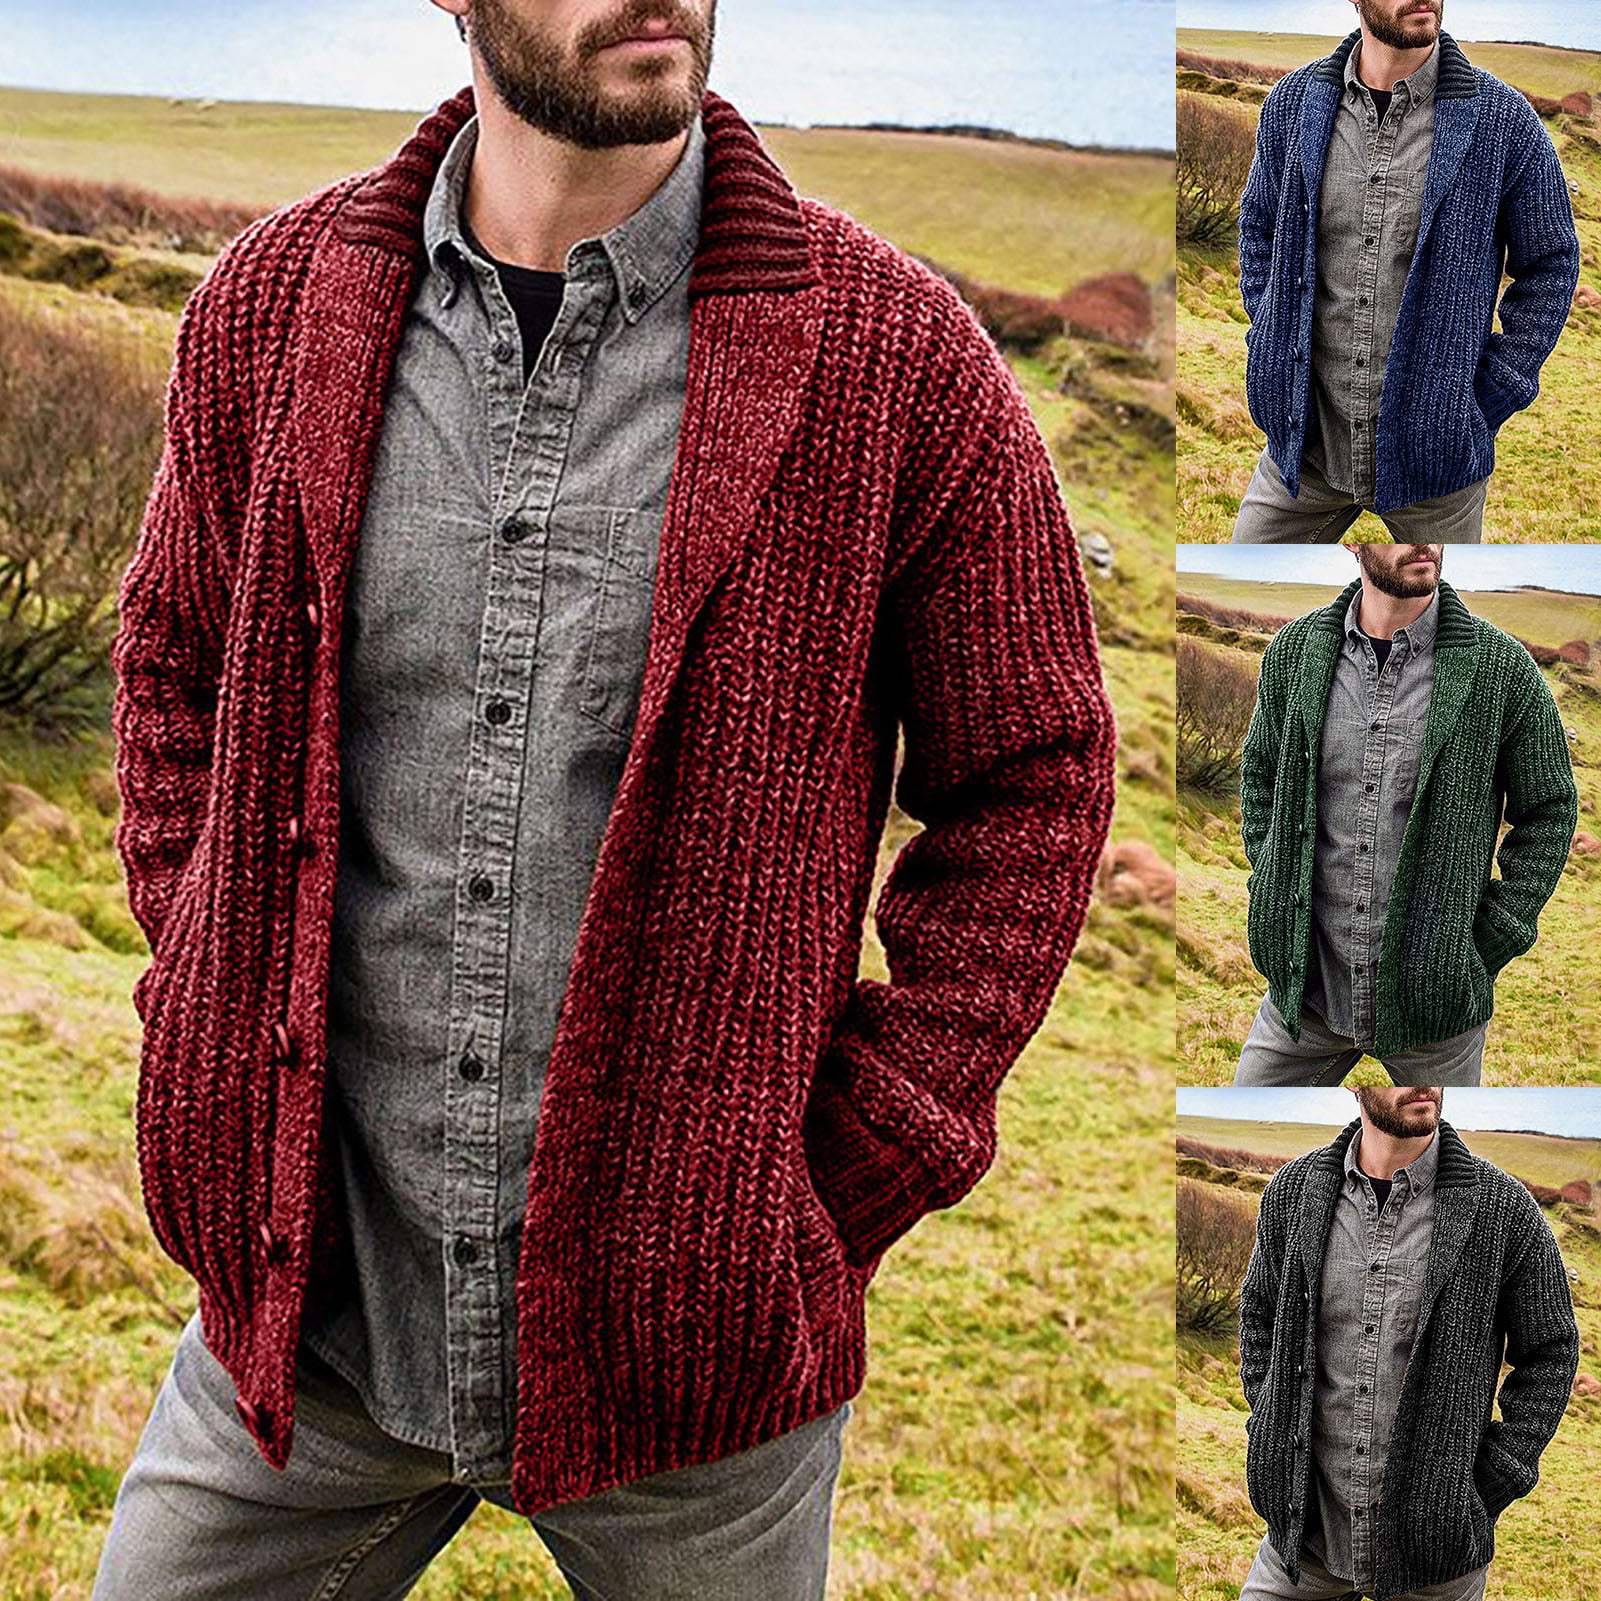 Clothing Mens Clothing Jumpers Cardigans Knitted jacket with lapel Spring/Autumn men sweater cardigan Many colors Made to order Cotton man jacket Hand knitted men knitwear 